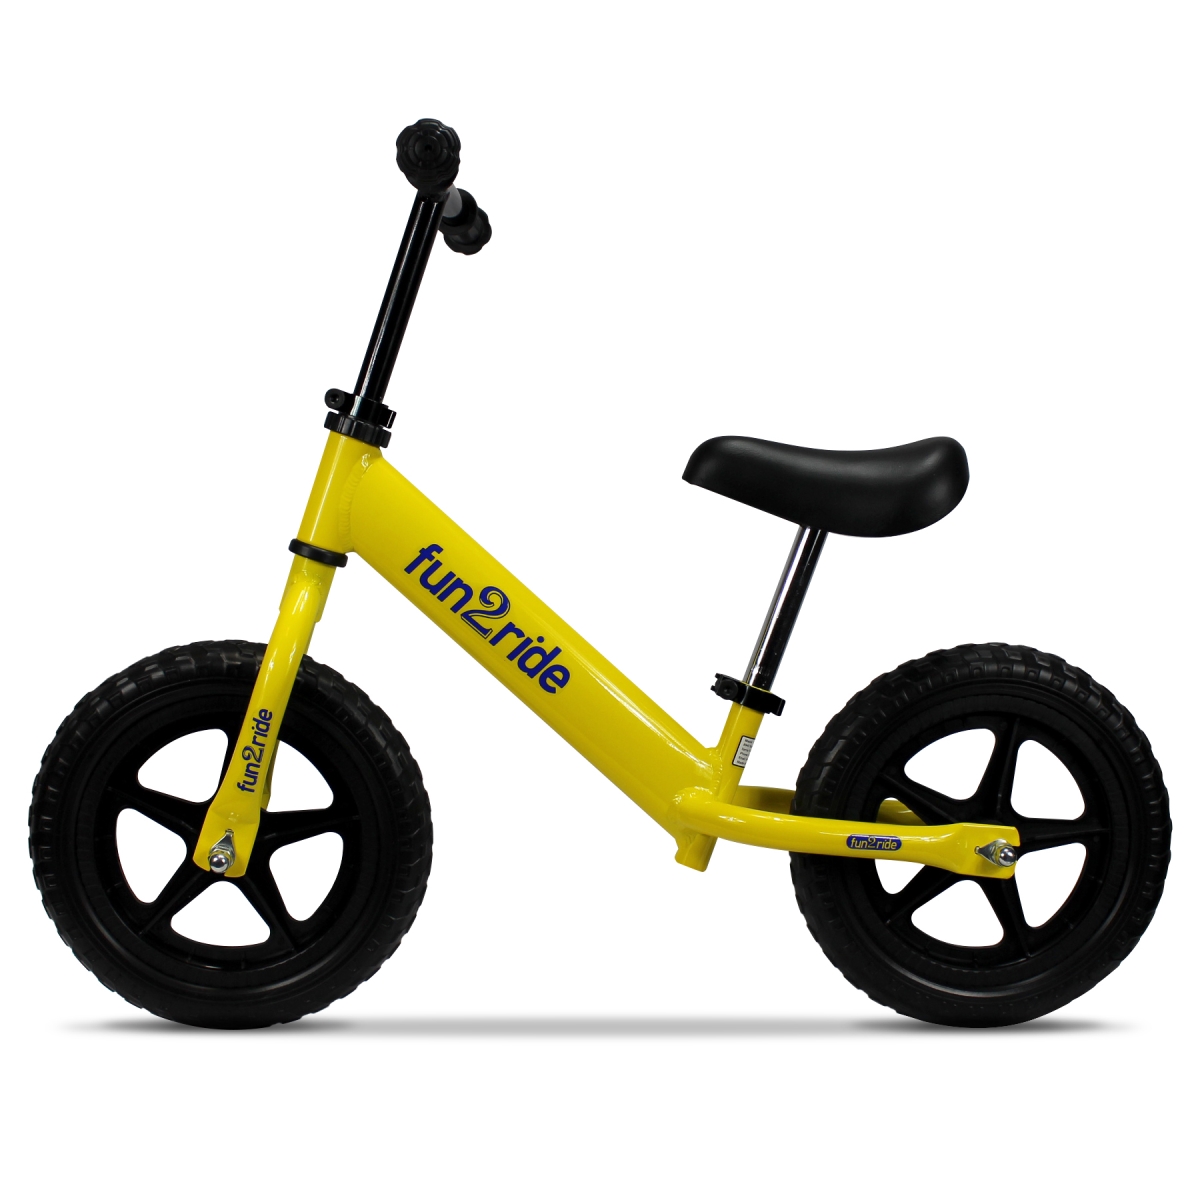 F2r-yl Unisex Lightweight Kids Balance Bike With 12 In. Puncture Resistant Tires, Yellow